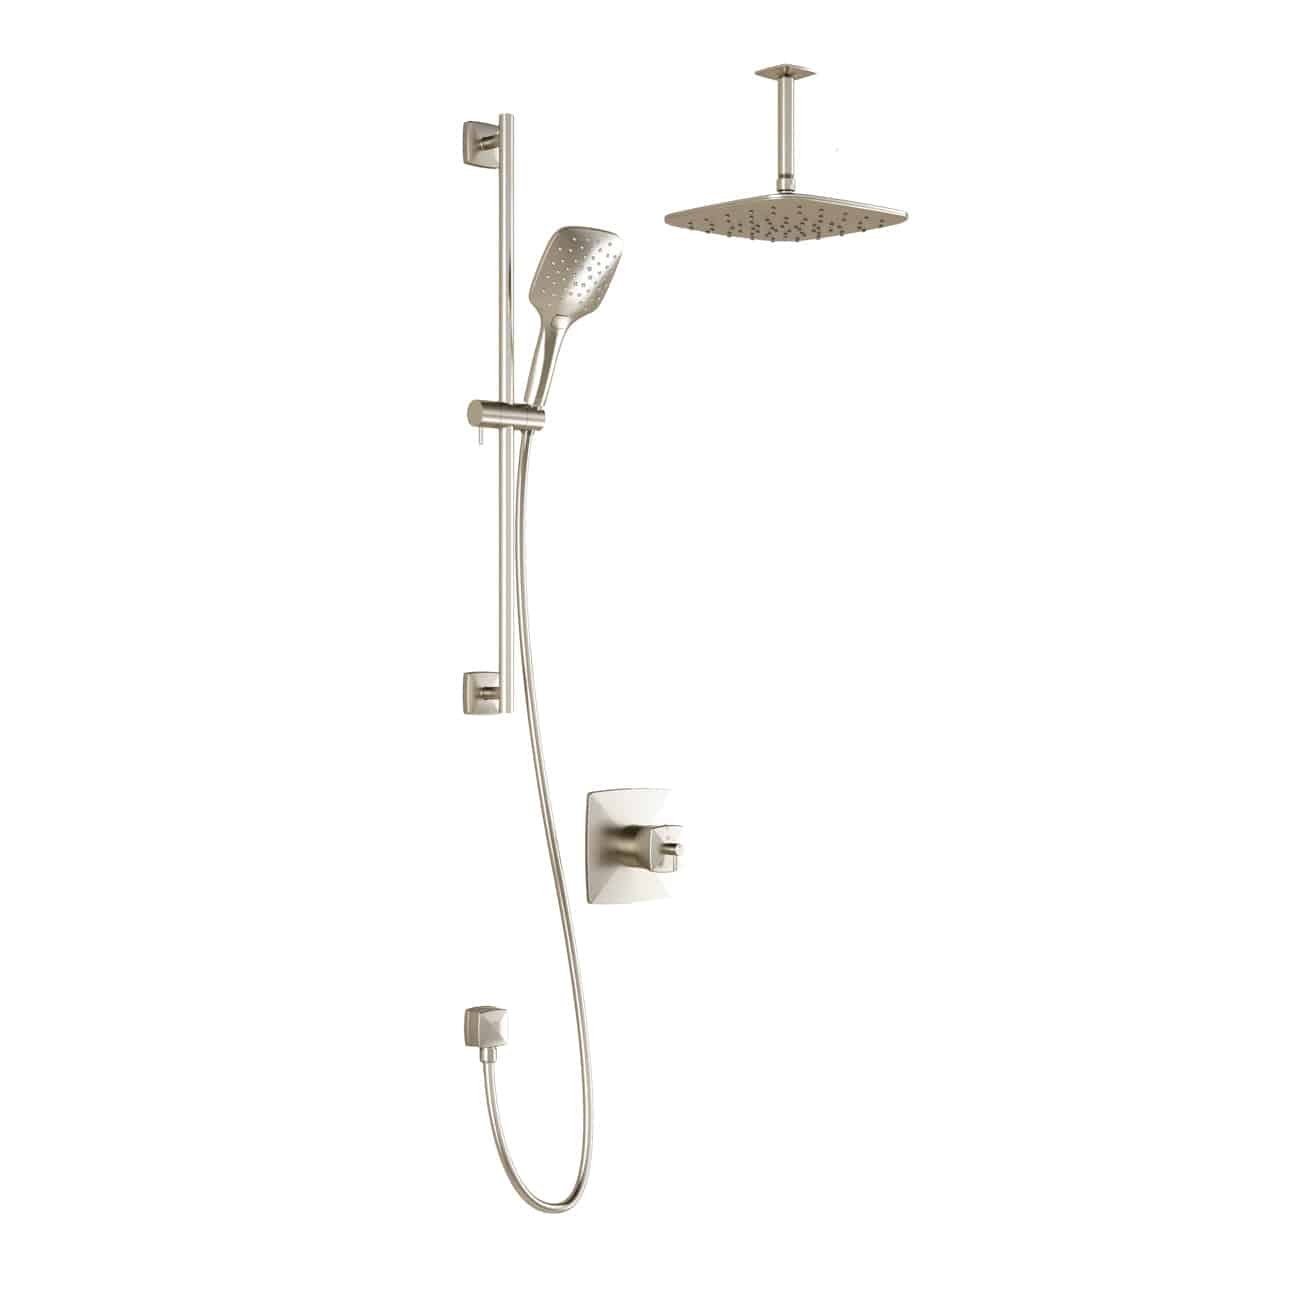 Kalia UMANI TCD1 PLUS AQUATONIK T/P Coaxial Shower System with Vertical Ceiling Arm- Brushed Nickel PVD